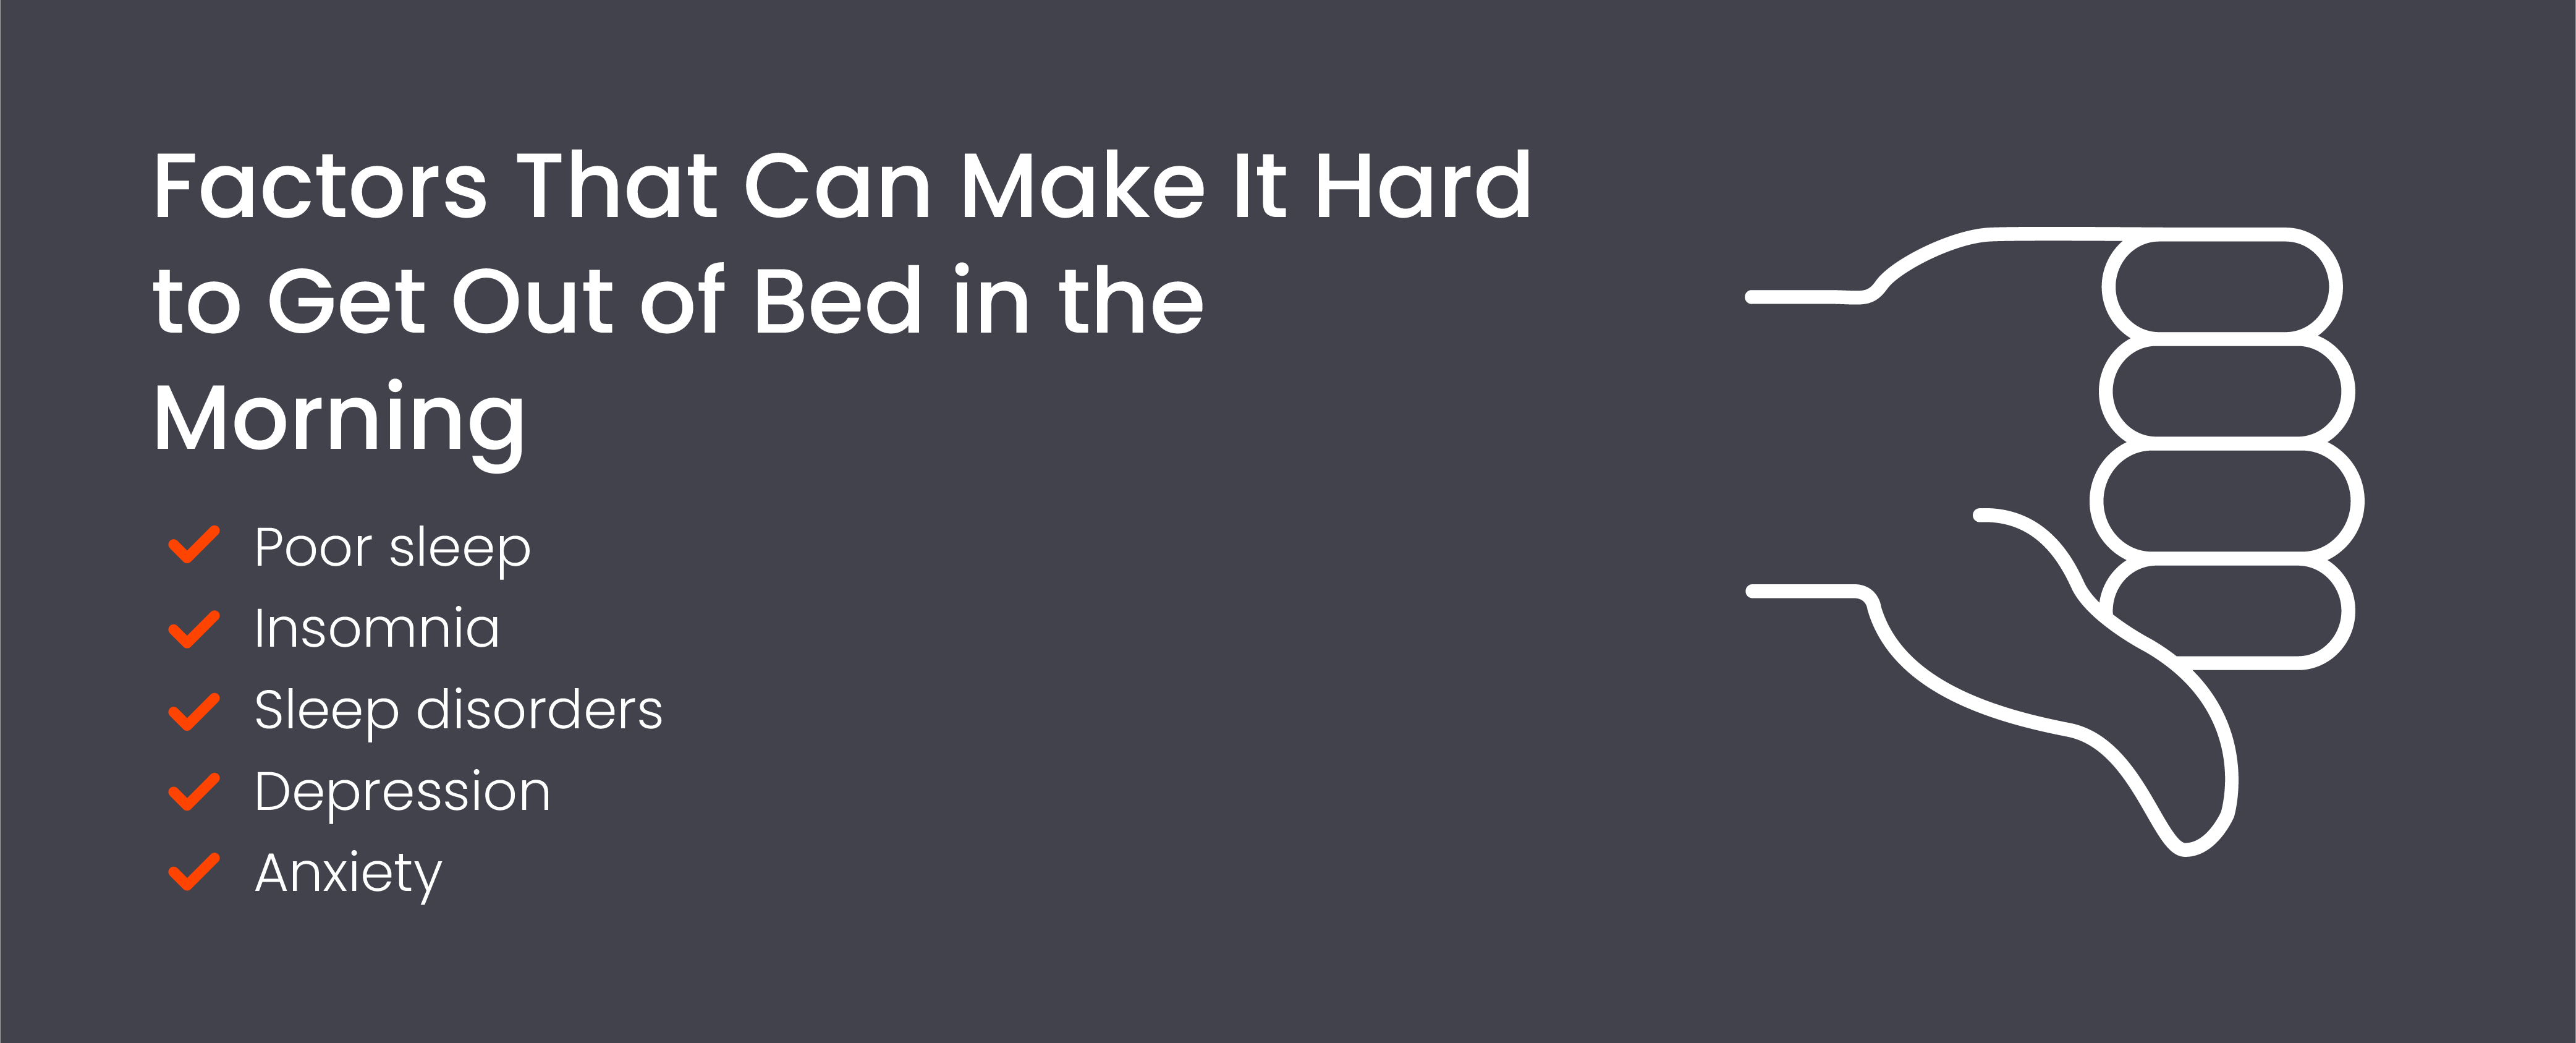 Factors that can make it hard to get out of bed in the morning